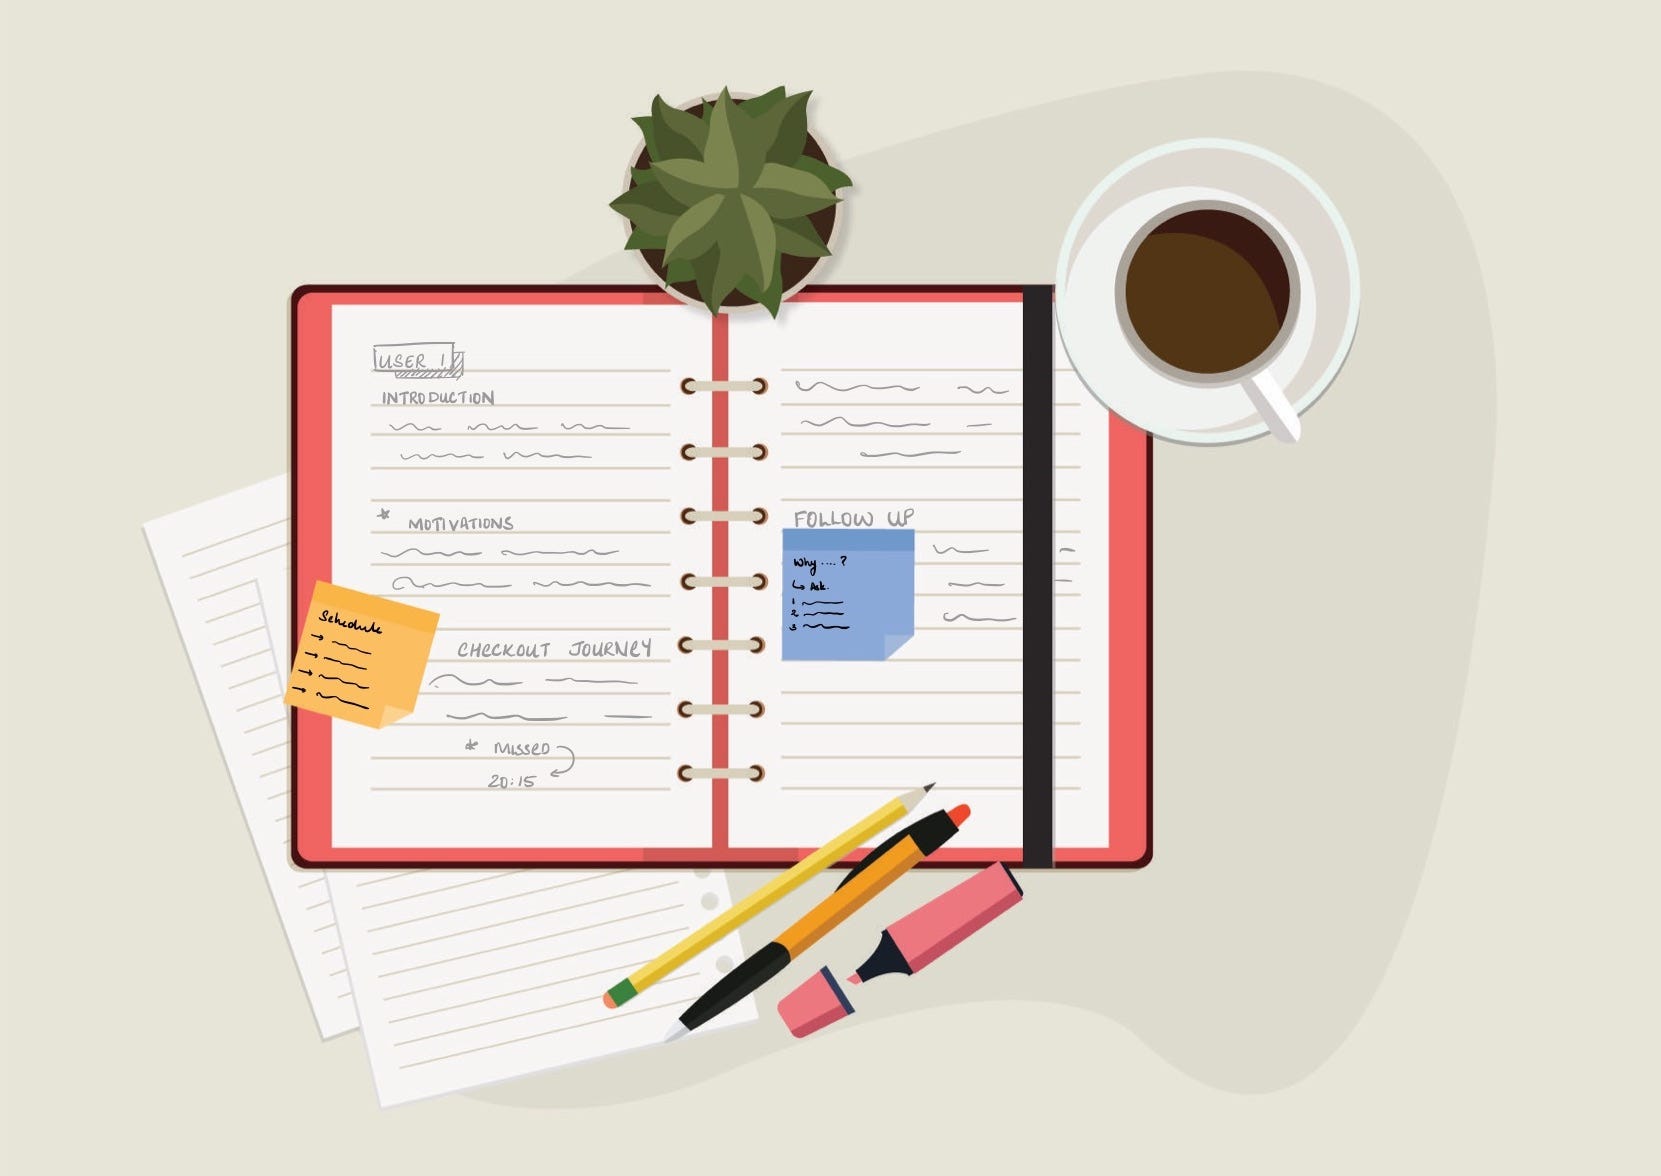 15 Note-Taking Tips for Your Next Class